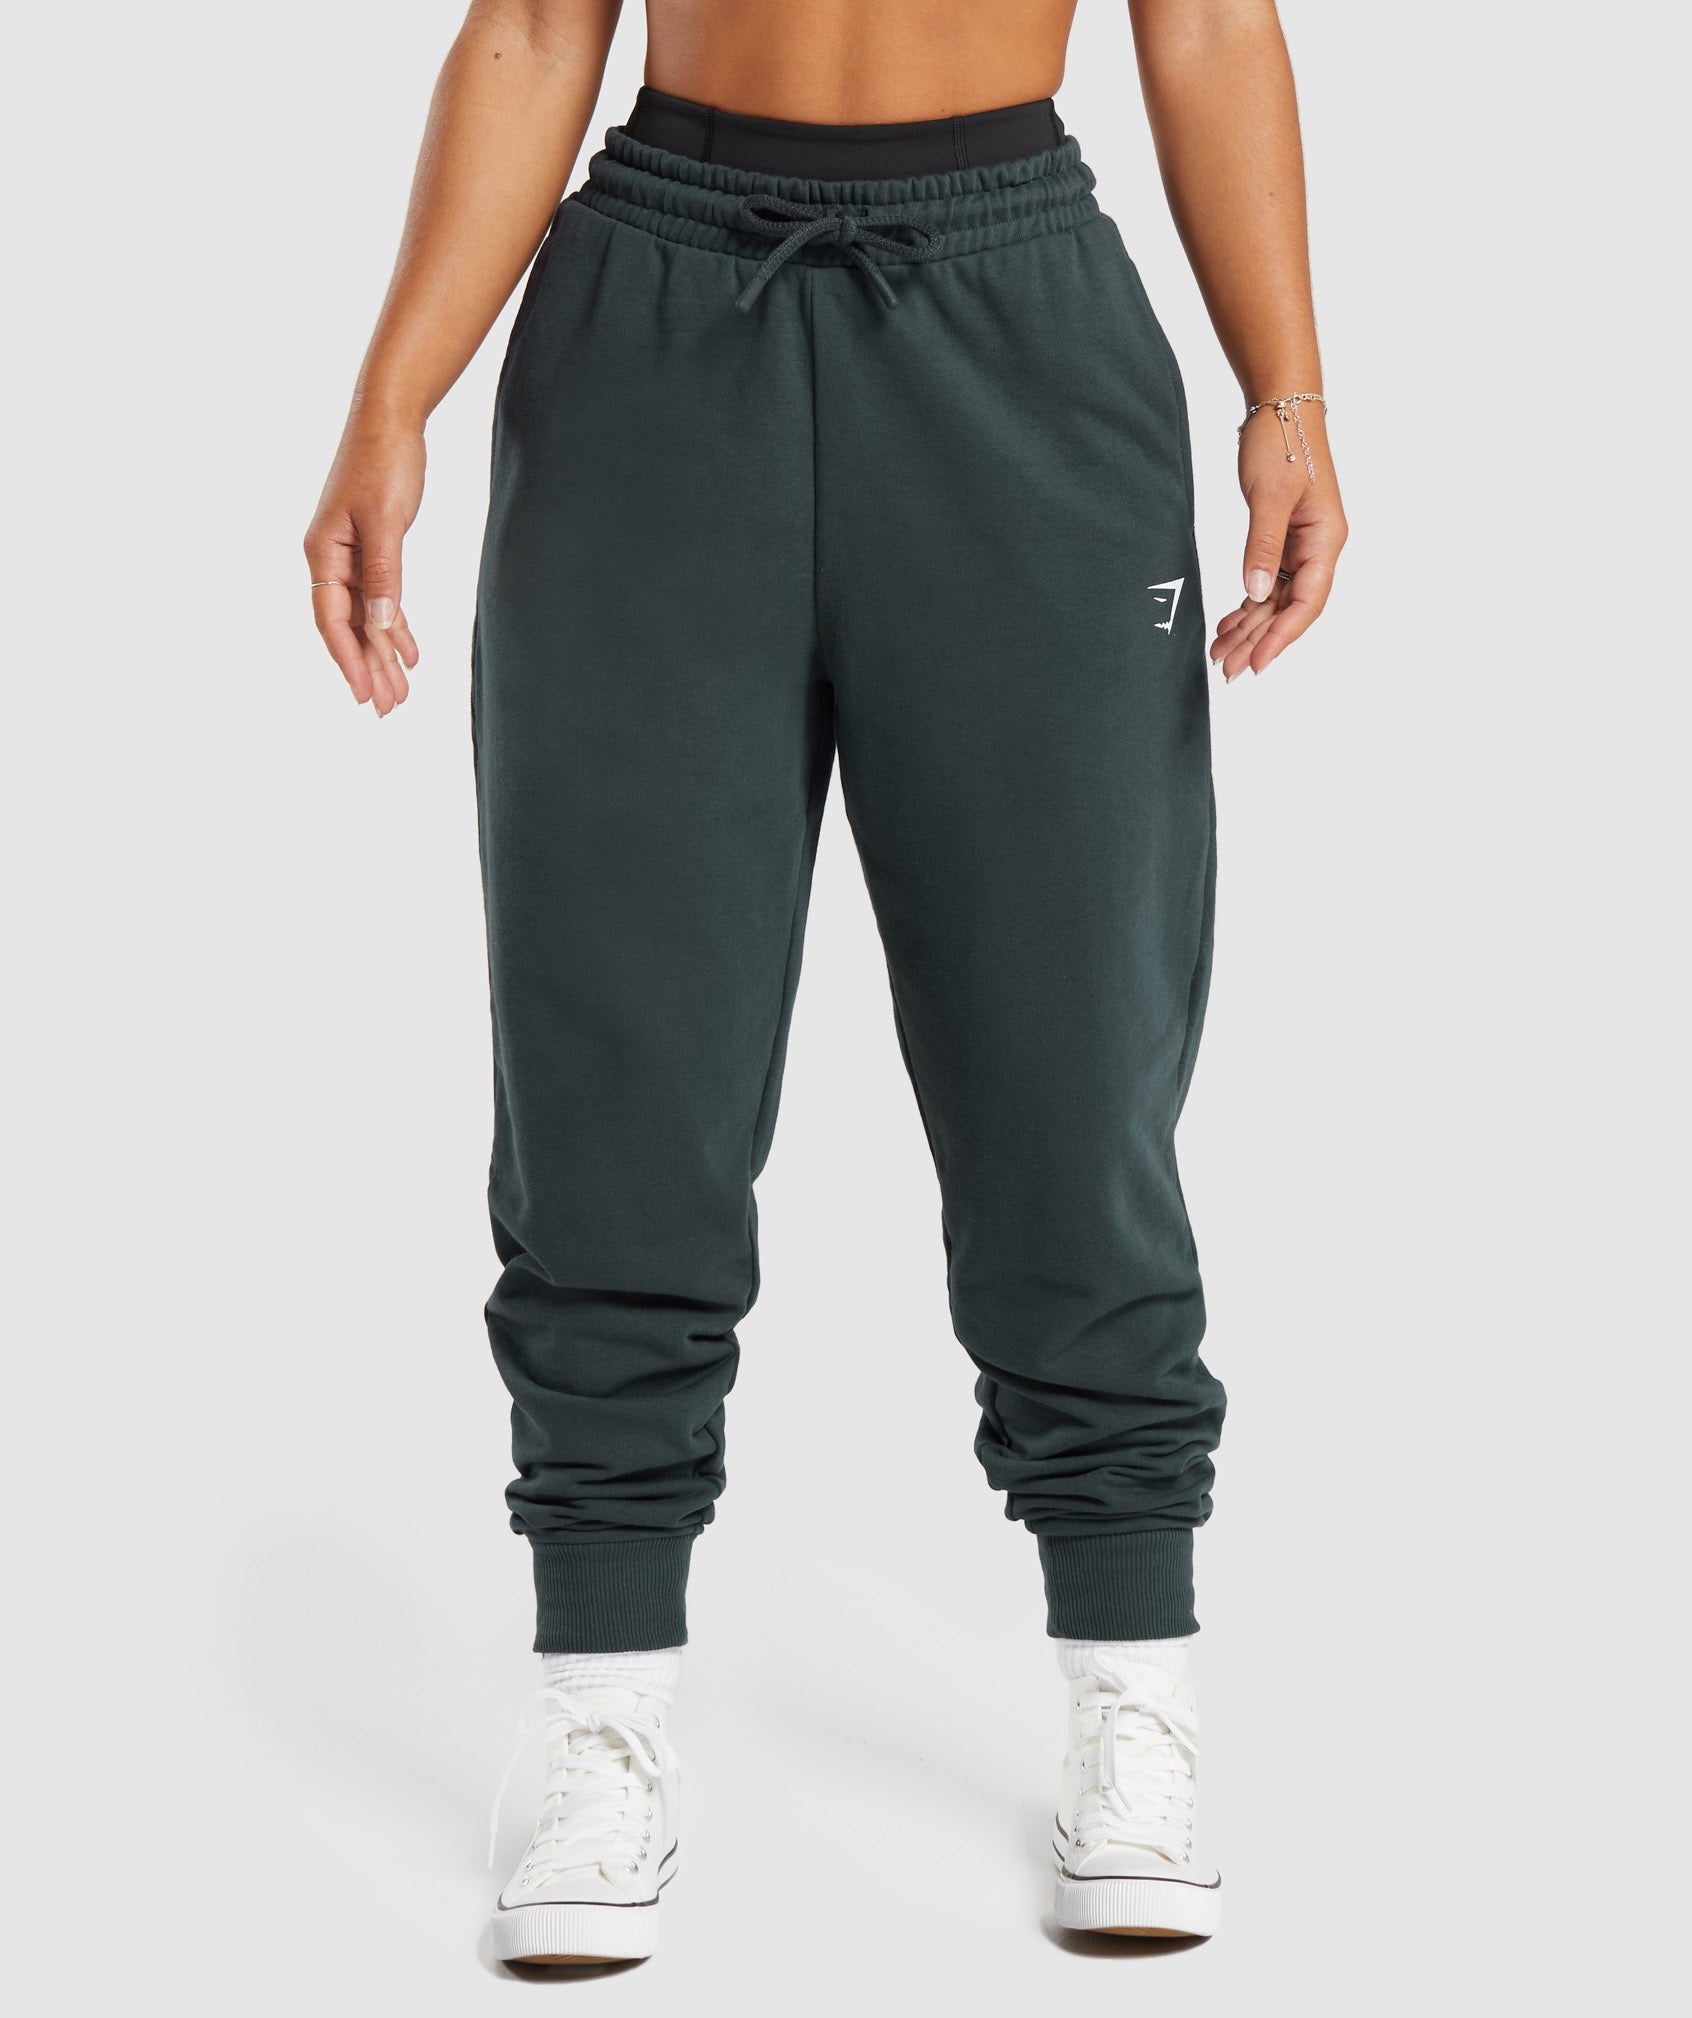 GS Power Joggers in Teal - view 1